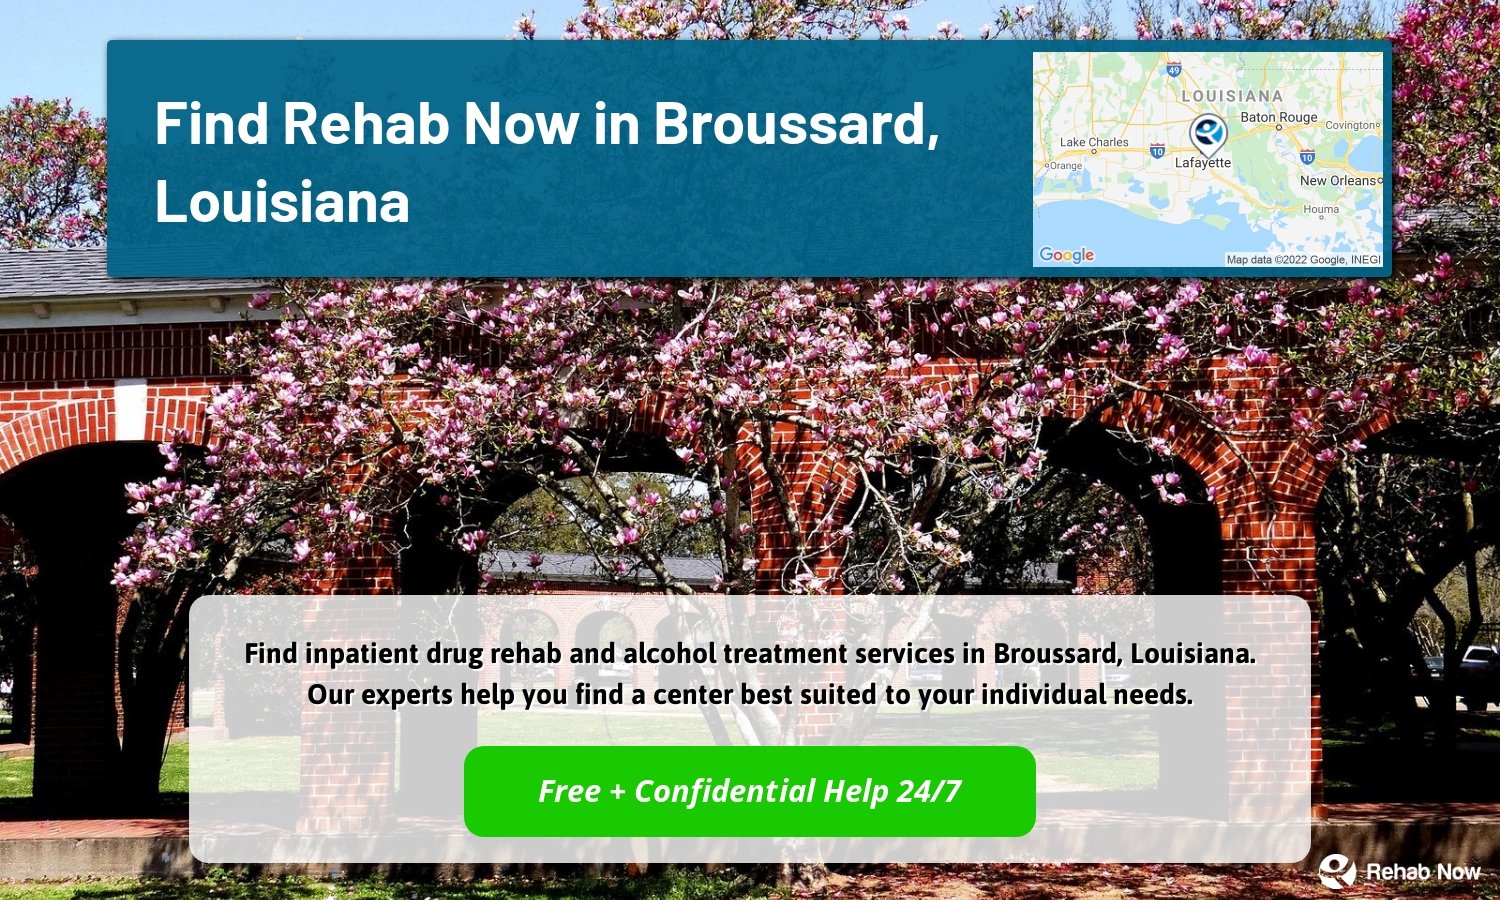 Find inpatient drug rehab and alcohol treatment services in Broussard, Louisiana. Our experts help you find a center best suited to your individual needs.